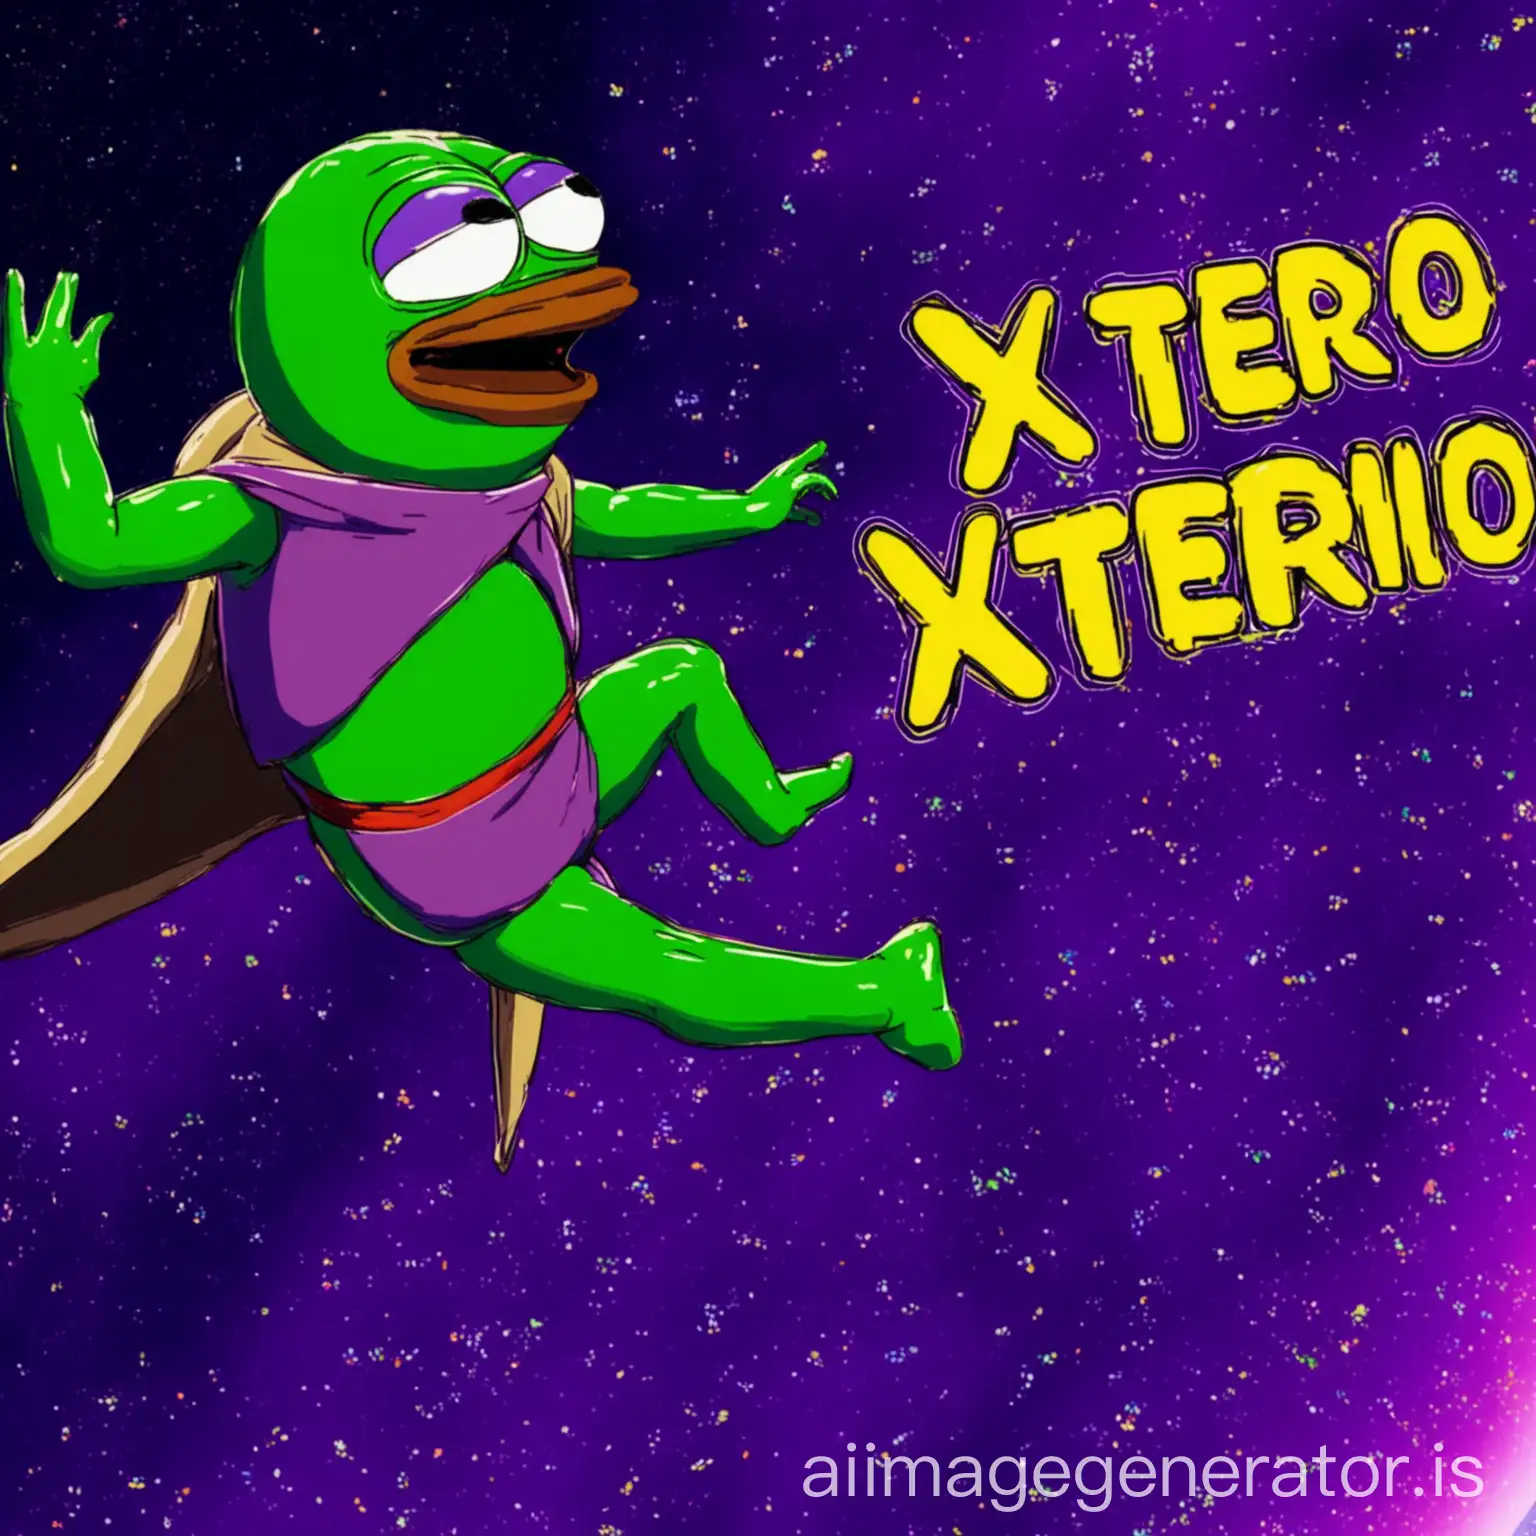 I see "XTERIO" text in purple space
also pepes meme flying😂
details are so high